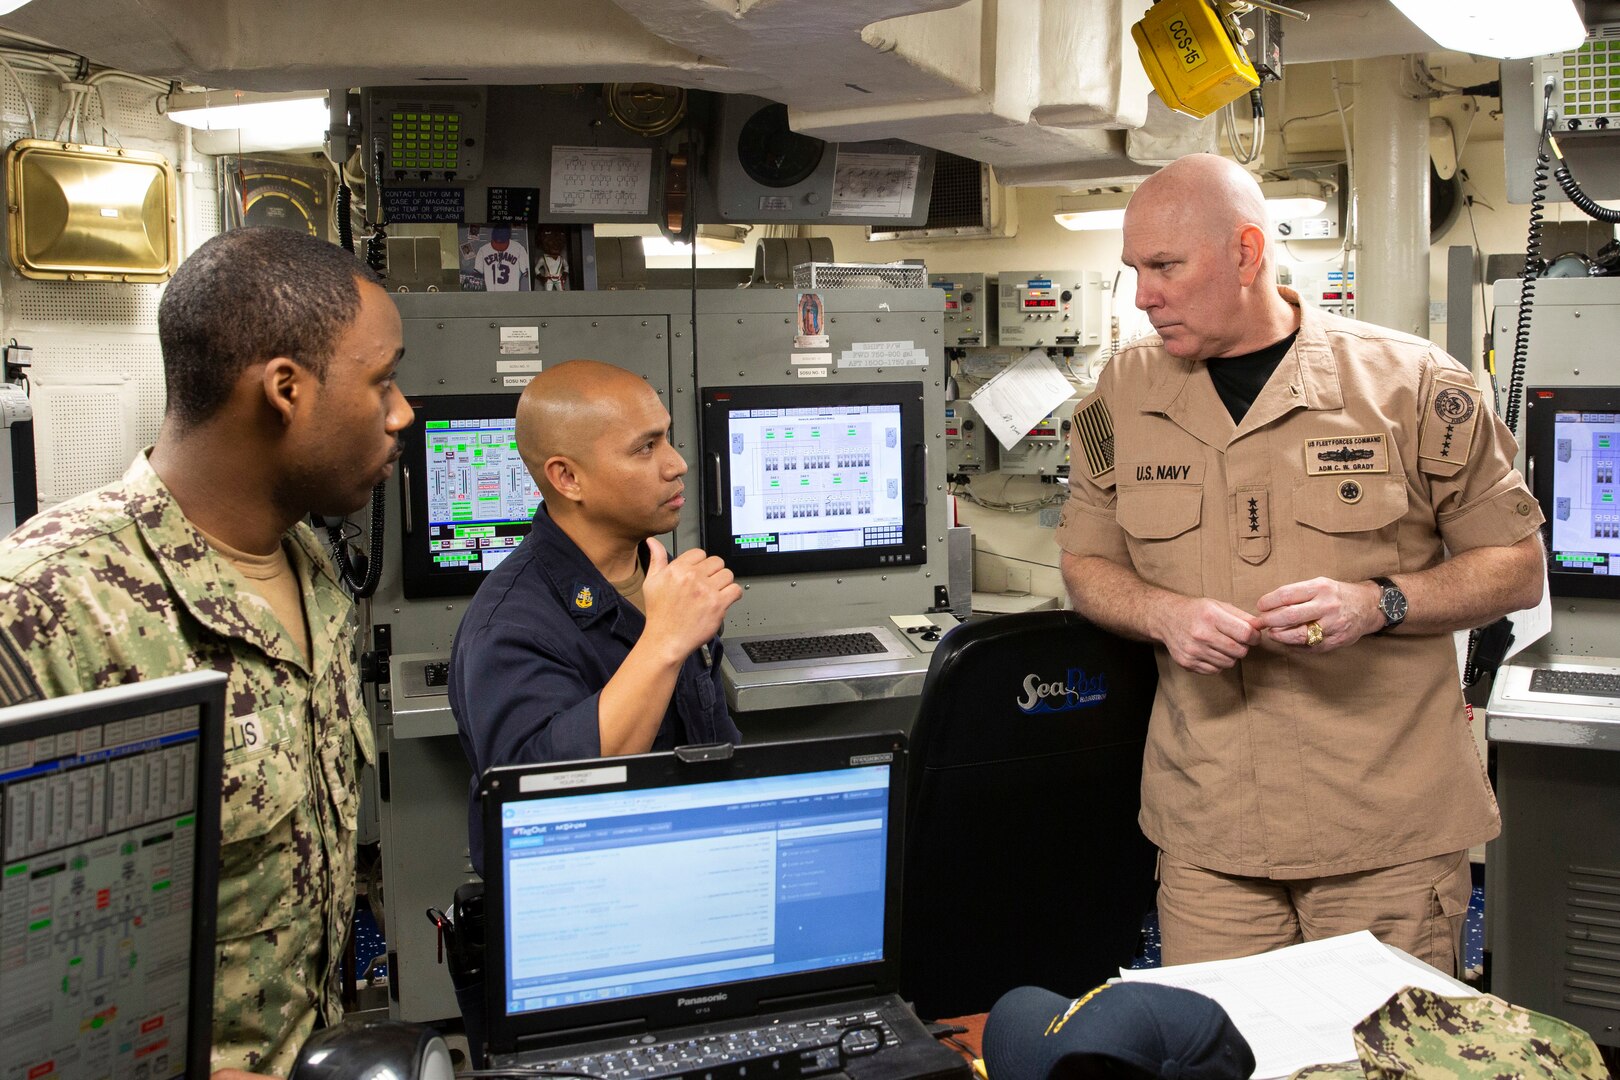 A senior naval officer speaks with sailors.